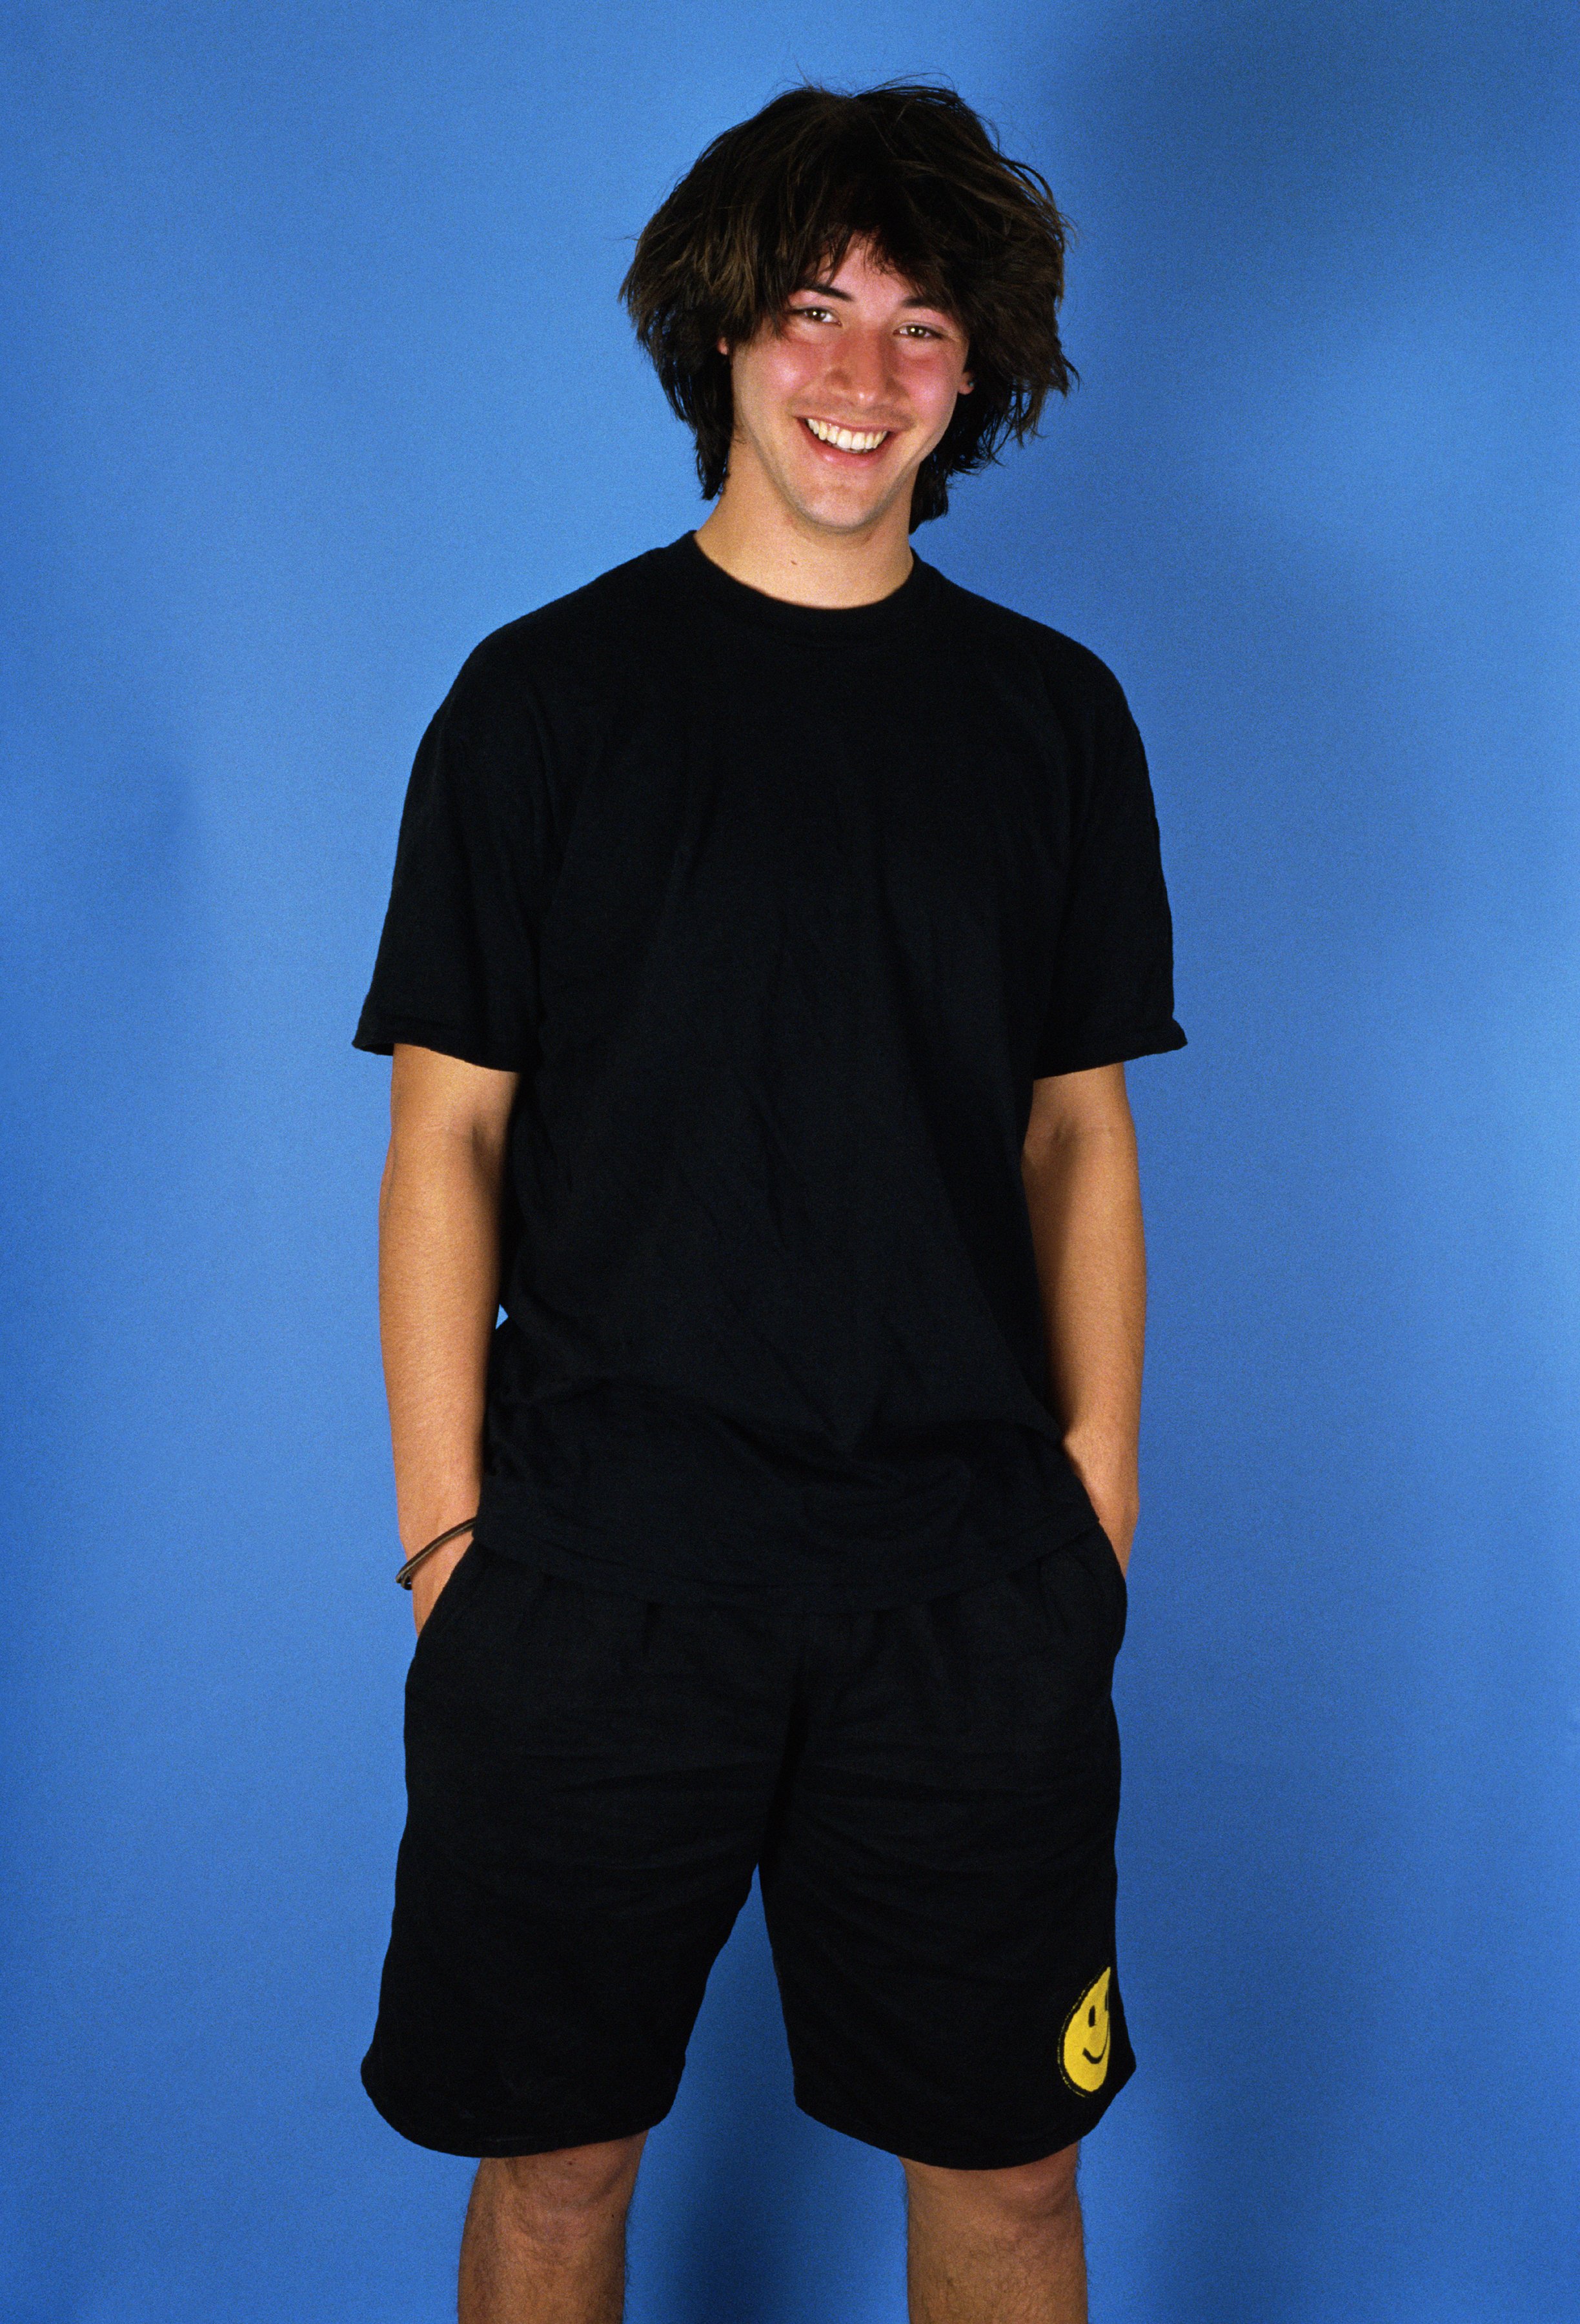 Keanu Reeves poses during a 1987 photo session promoting the film "Bill & Ted's Excellent Adventure" in West Hollywood, California. | Source: Getty Images